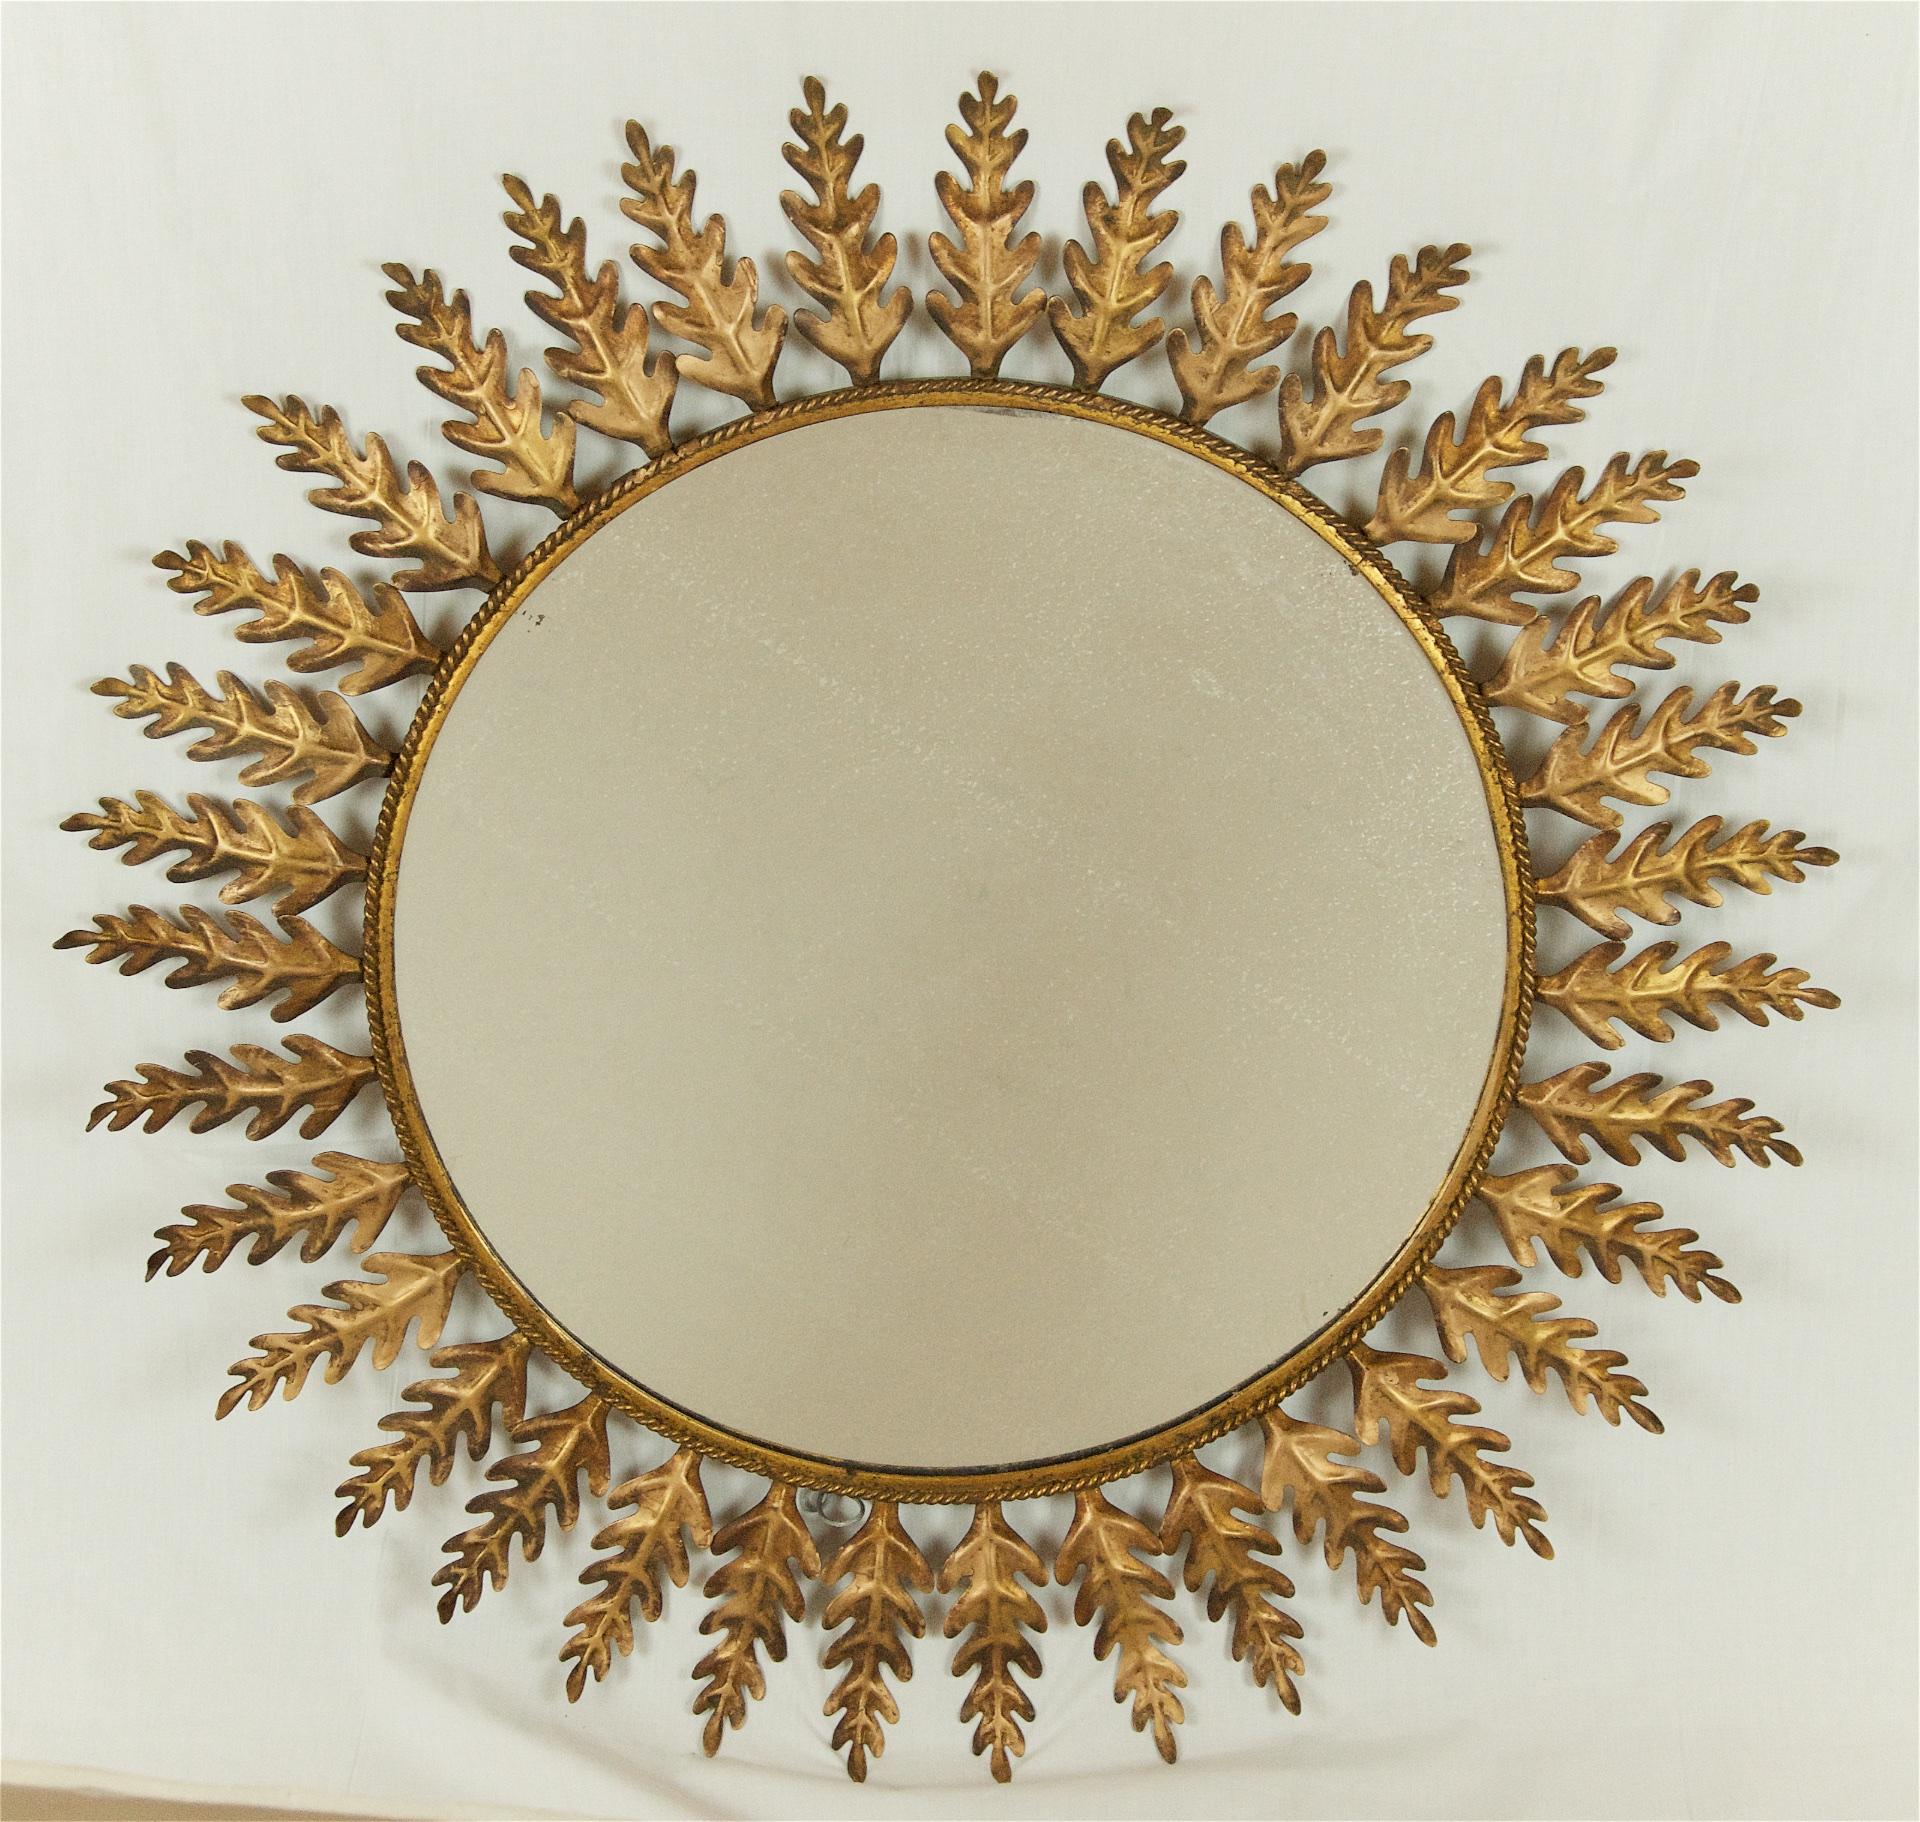 Beautiful and useful with a large mirror surface. Metal leaves add to the elegance of this piece. A great addition to all decors.